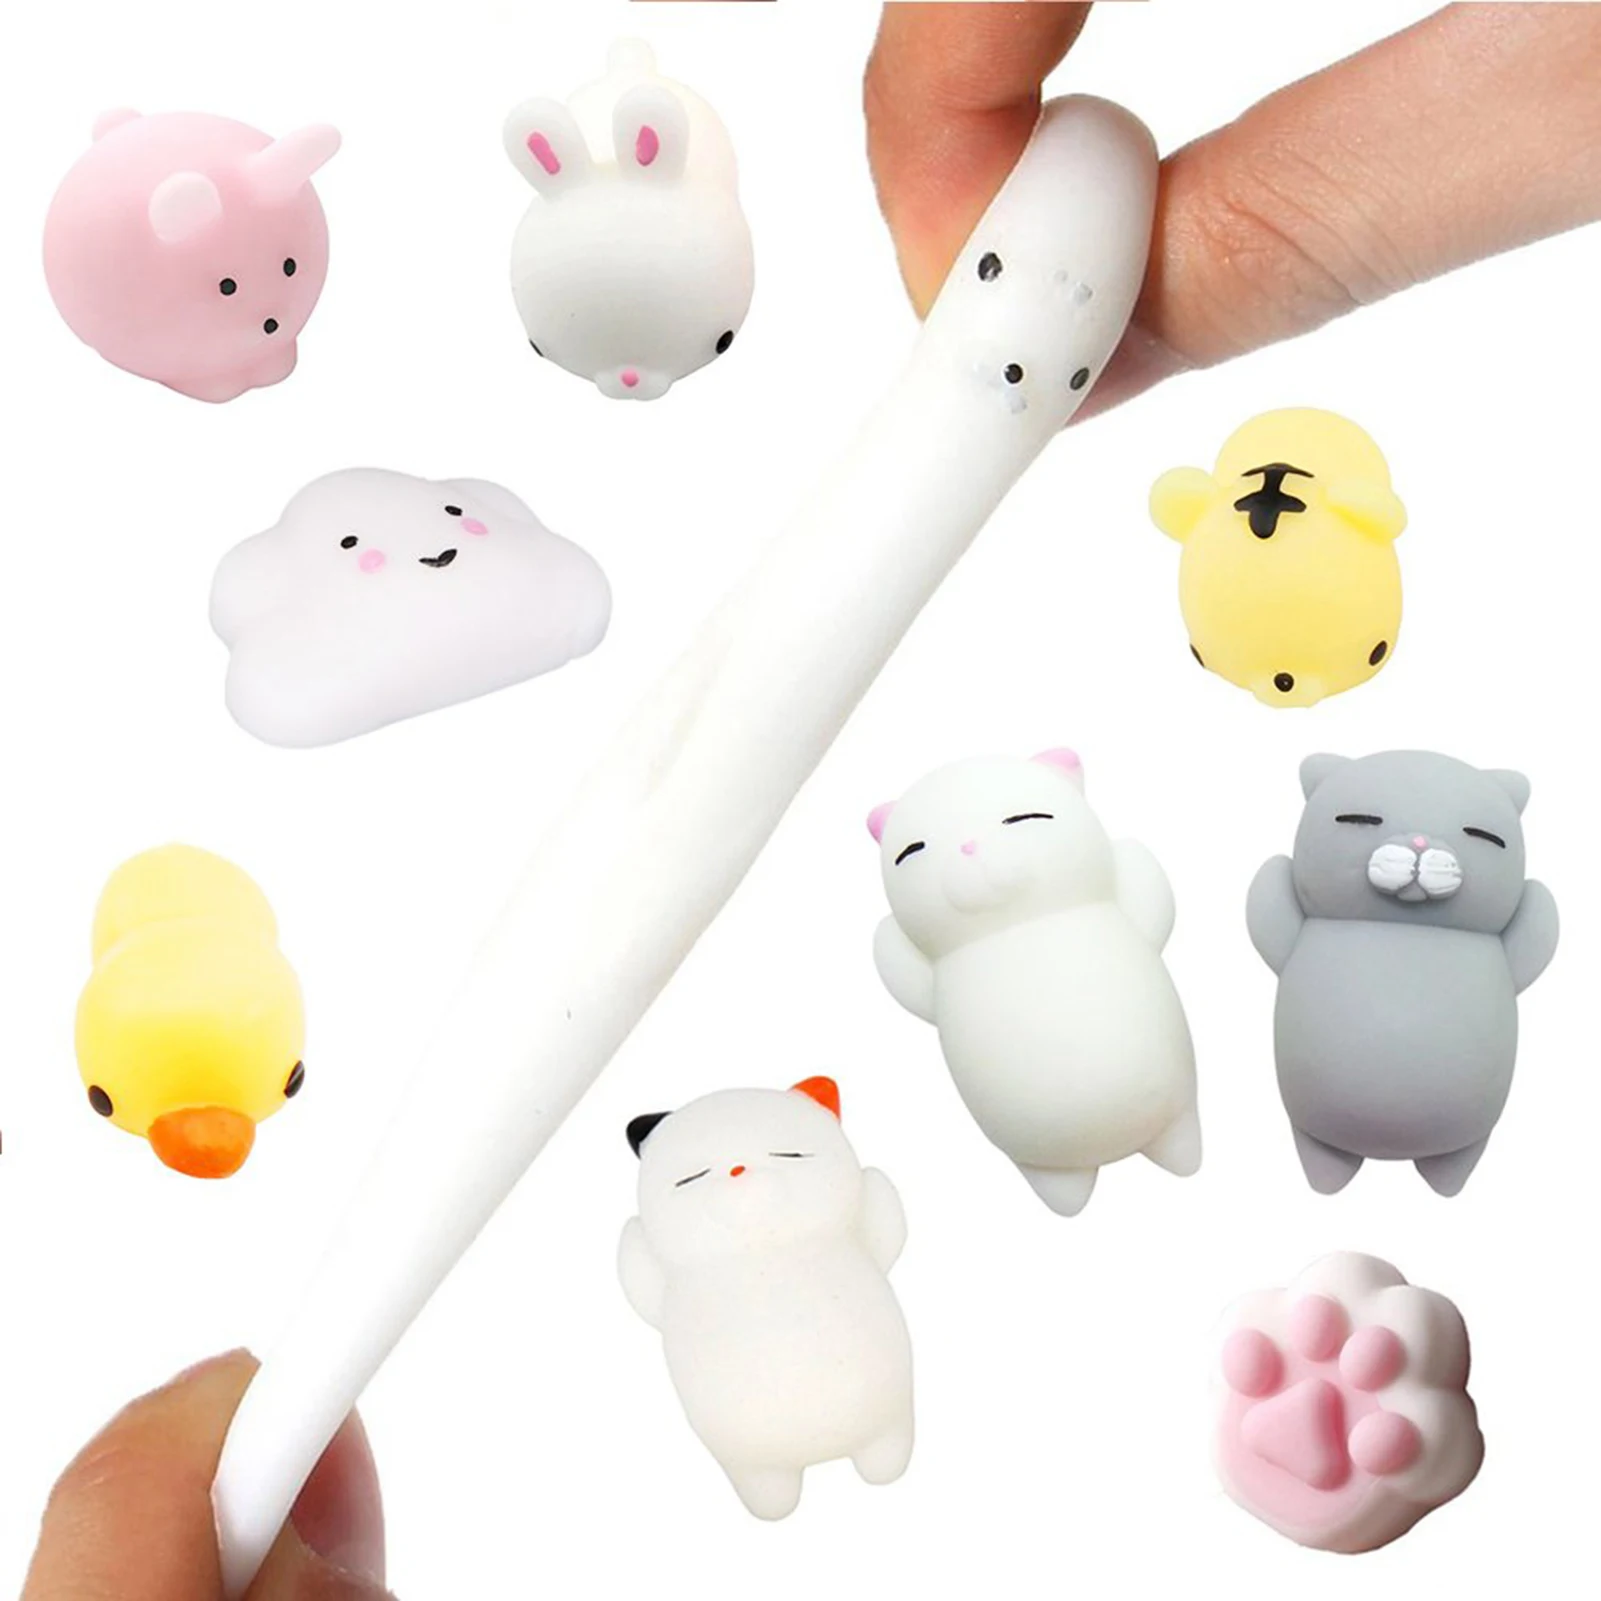 24 Pieces New Soft Squeeze Toys Cute Cartoon Stress Relief Miniature Animal Squeeze Toy Decompresssion Toys For Kids Gifts enlarge